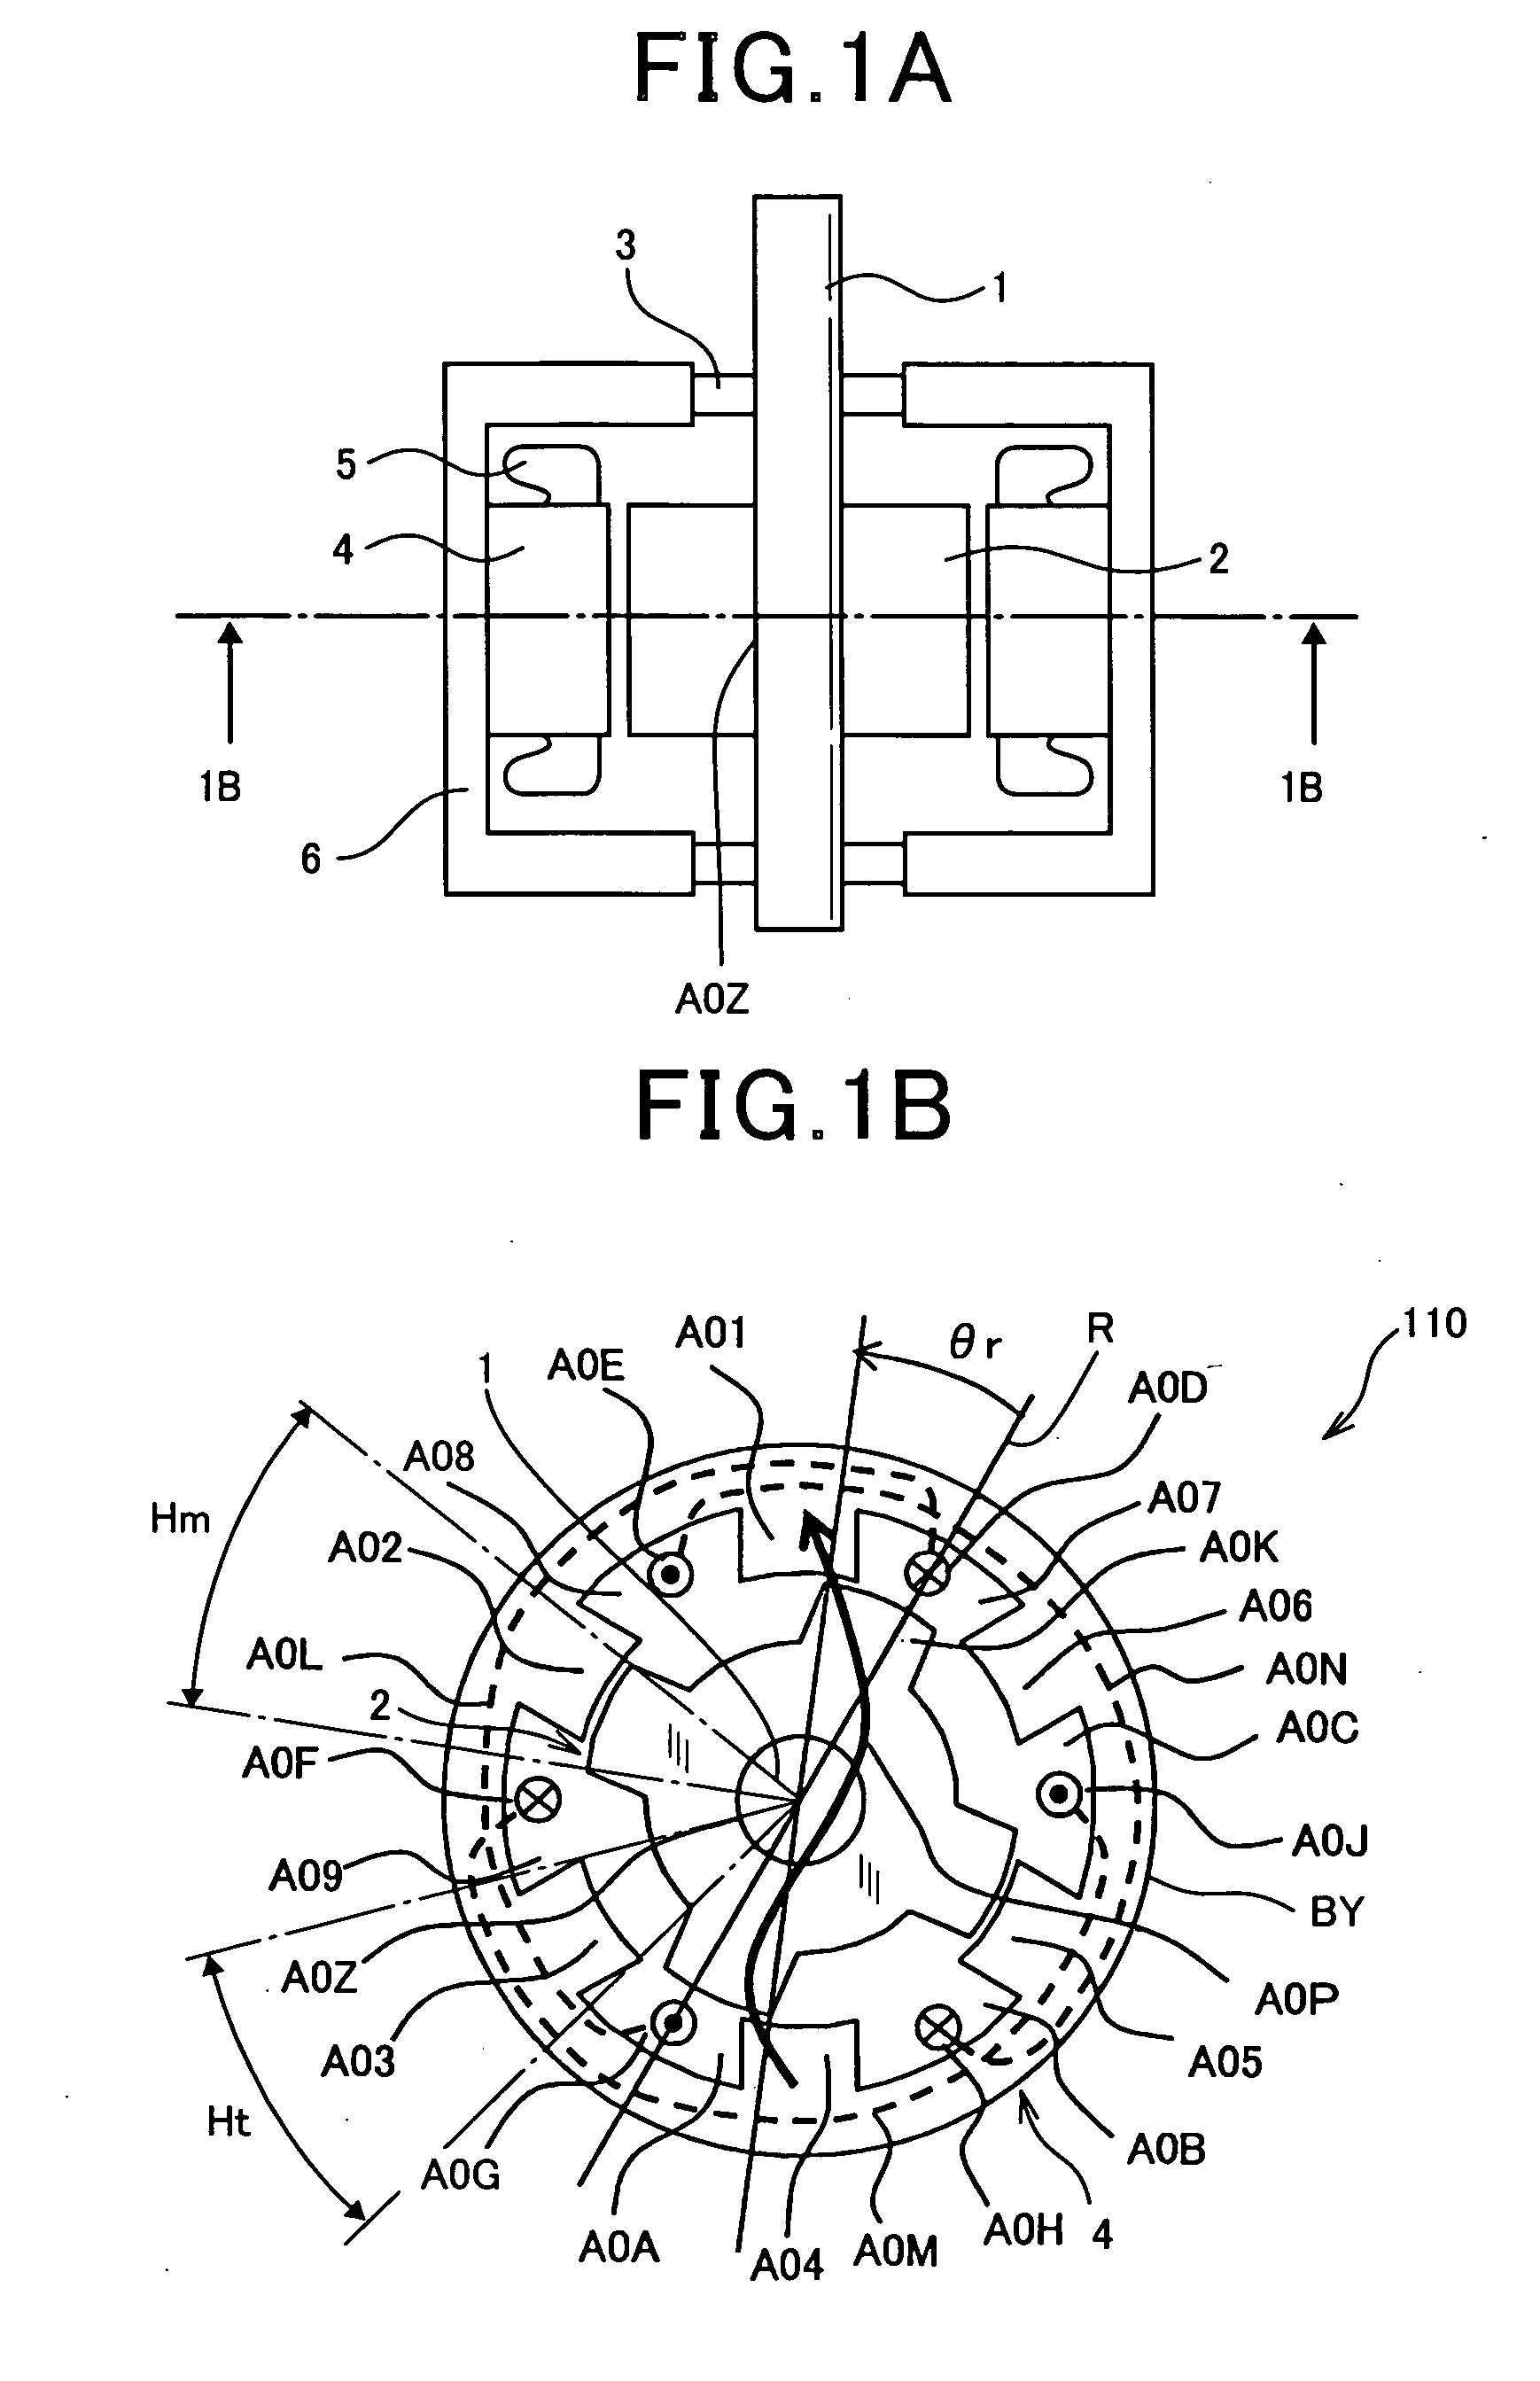 Reluctance motor with improved stator structure